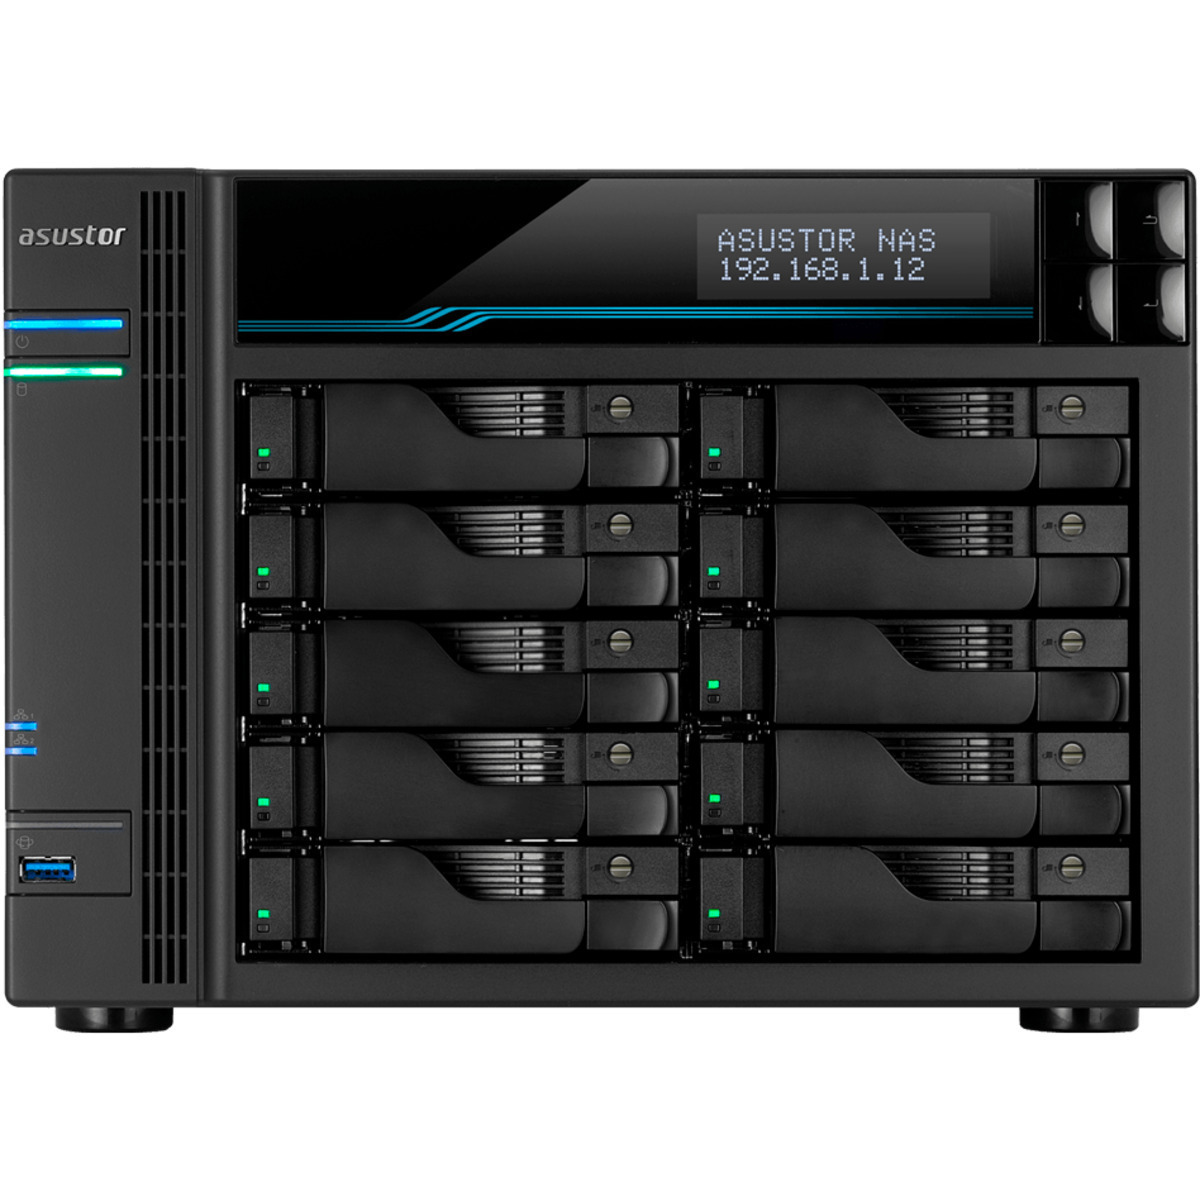 buy $7394 ASUSTOR AS7110T Lockerstor 10 Pro 180tb Desktop NAS - Network Attached Storage Device 10x18000gb Toshiba Enterprise Capacity MG09ACA18TE 3.5 7200rpm SATA 6Gb/s HDD ENTERPRISE Class Drives Installed - Burn-In Tested - nas headquarters buy network attached storage server device das new raid-5 free shipping usa christmas new year holiday sale AS7110T Lockerstor 10 Pro